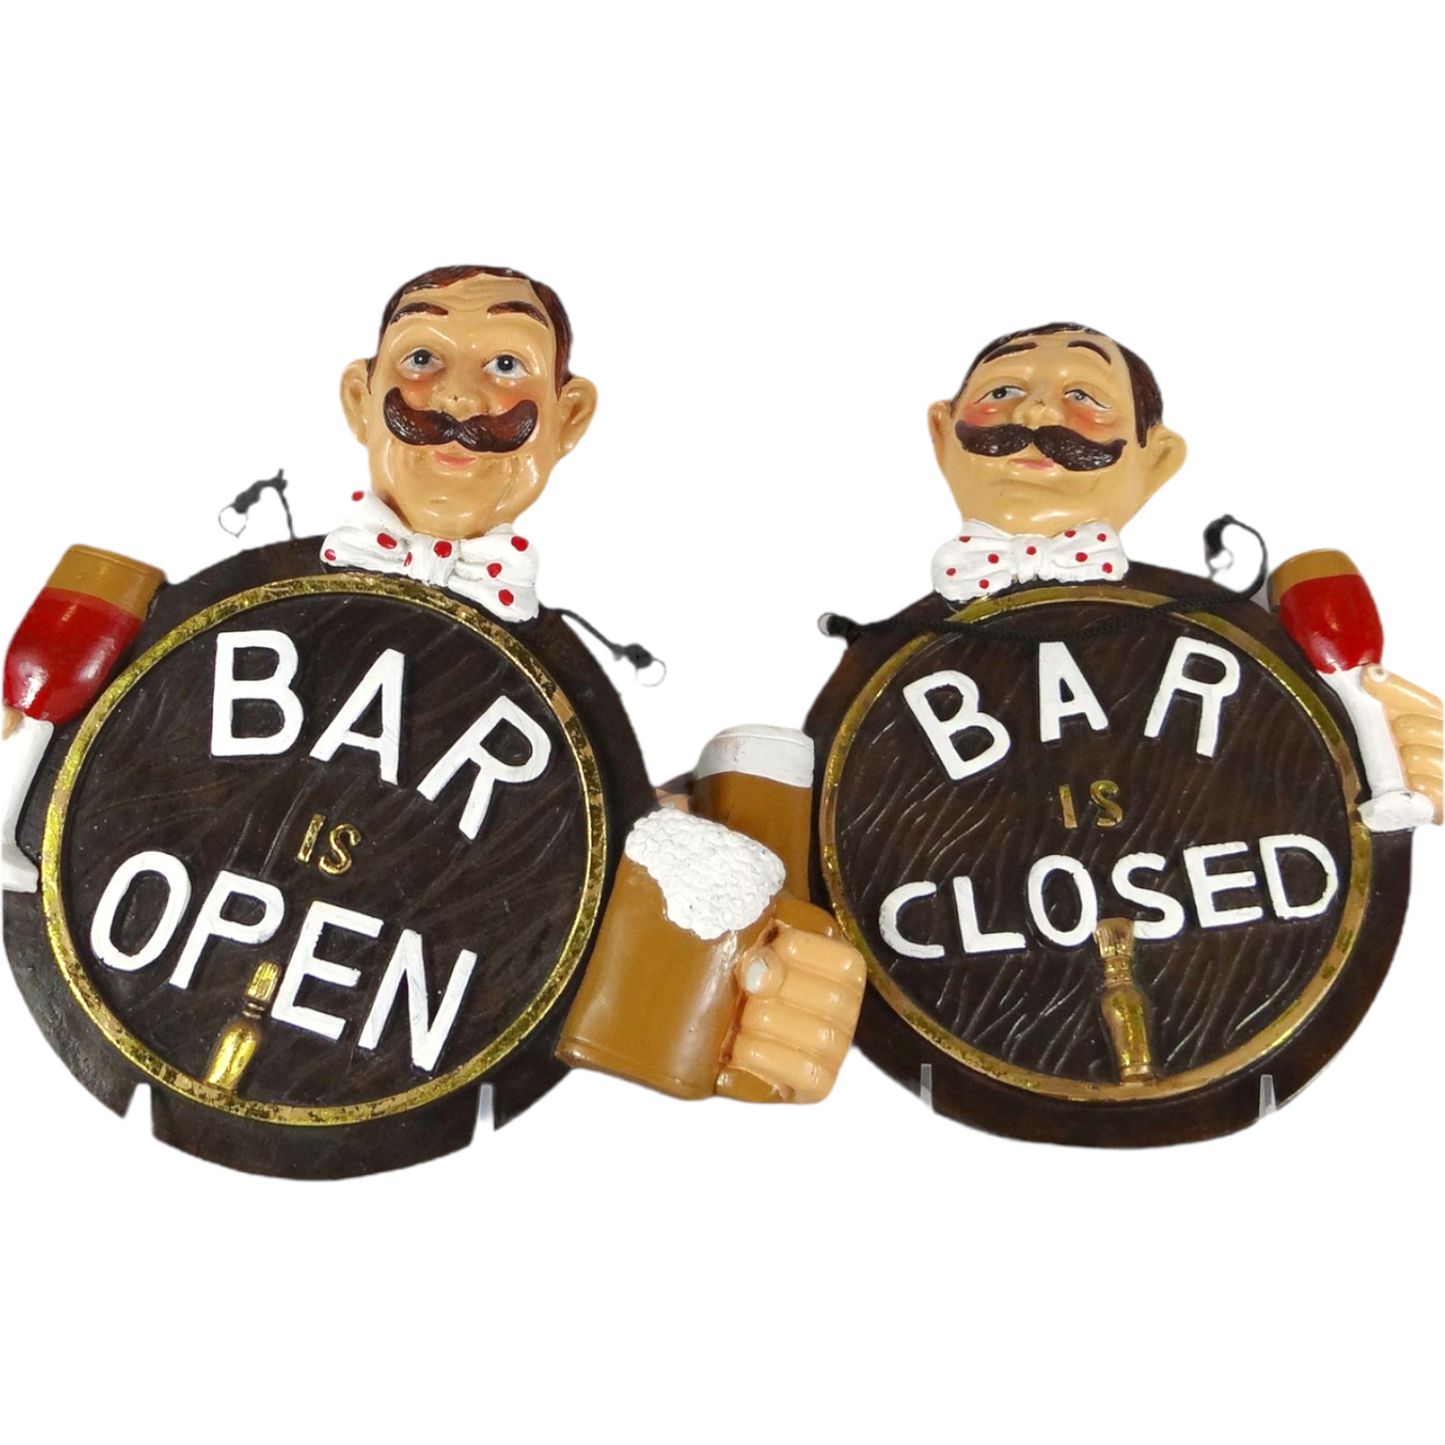 BAR SIGN- OPEN/CLOSED